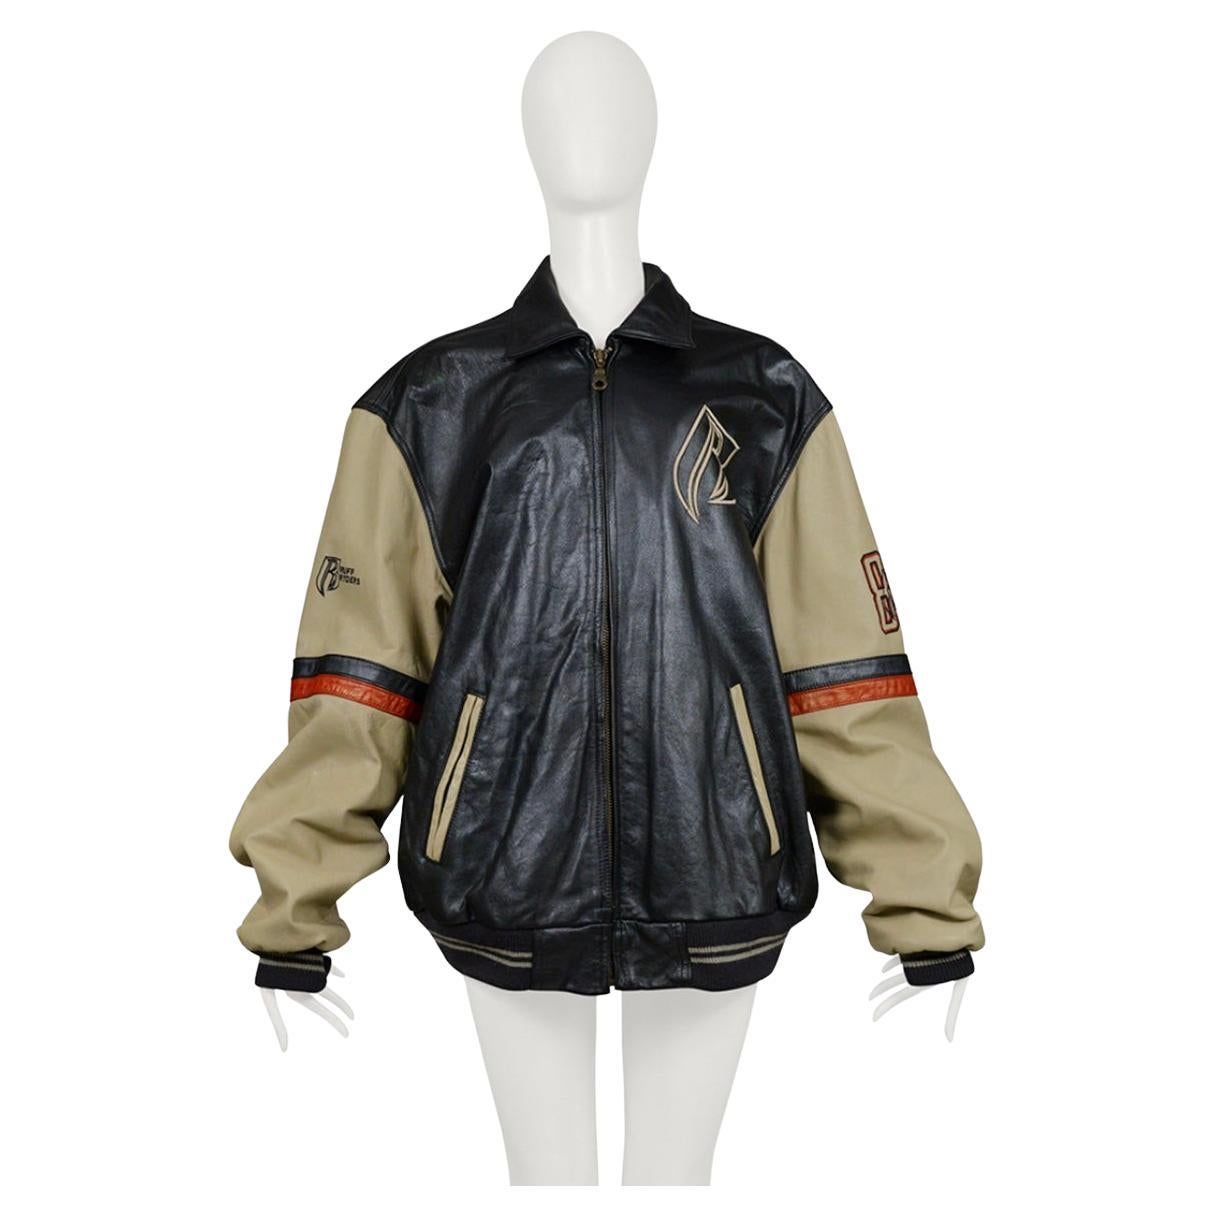 Resurrection is offering a vintage unisex leather bomber by Ruff Ryders with a color block design, patches, and embroidery. This varsity bomber jacket is fully lined with quilted satin and has interior and exterior pockets.
* Ruff Ryders
*